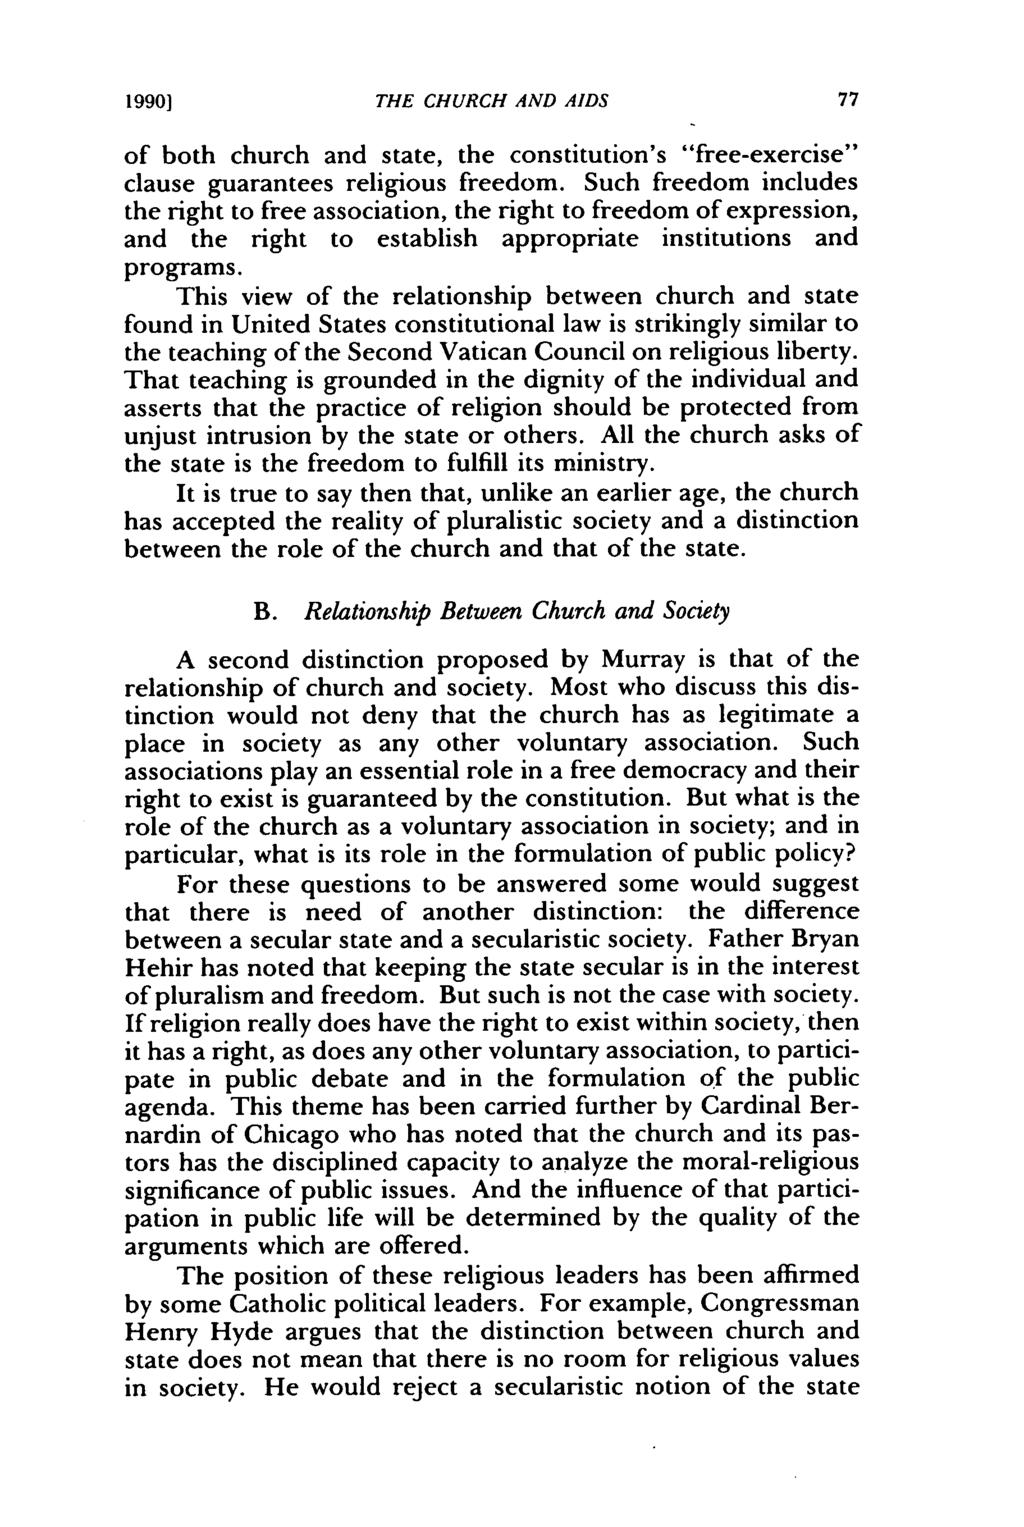 1990] THE CHURCH AND AIDS of both church and state, the constitution's "free-exercise" clause guarantees religious freedom.